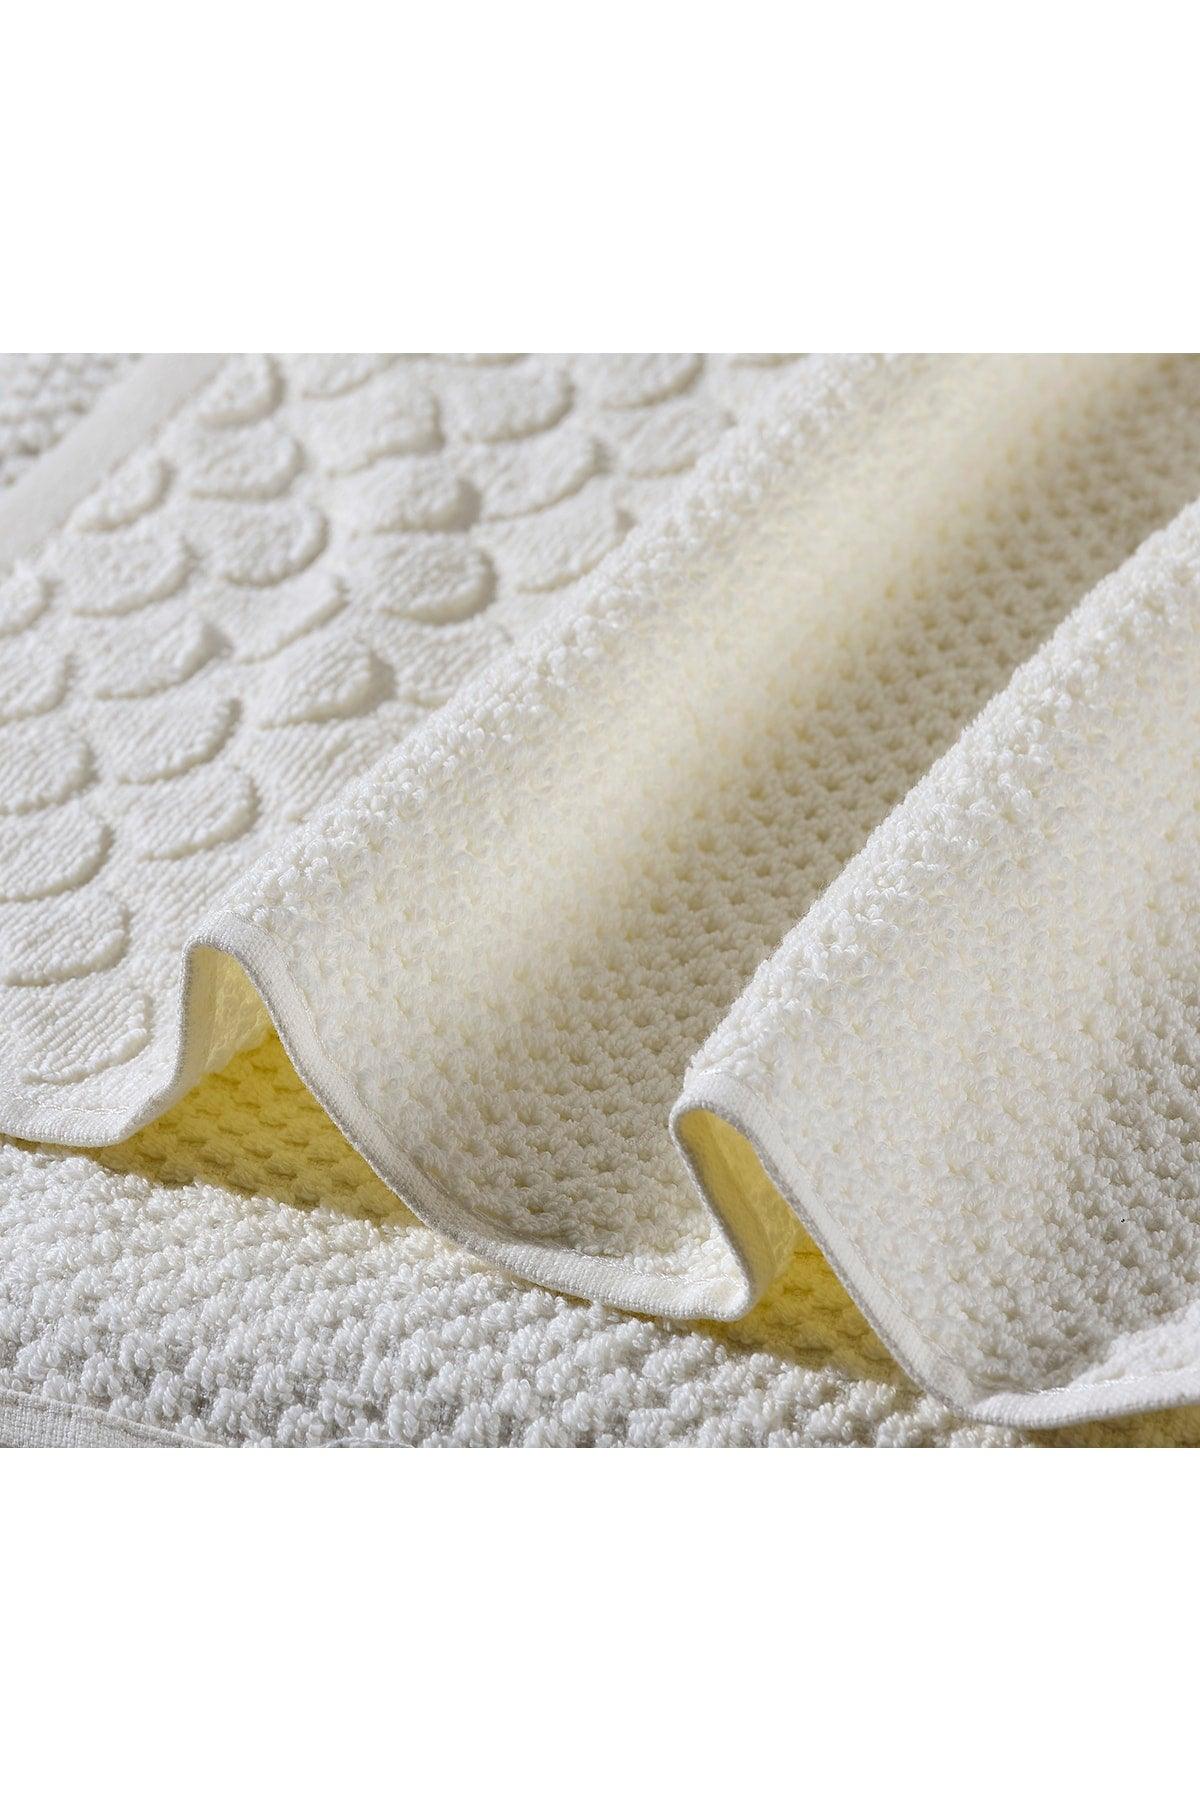 | Extra Soft Cotton Rice Knitted Towel Set of 2 - Swordslife